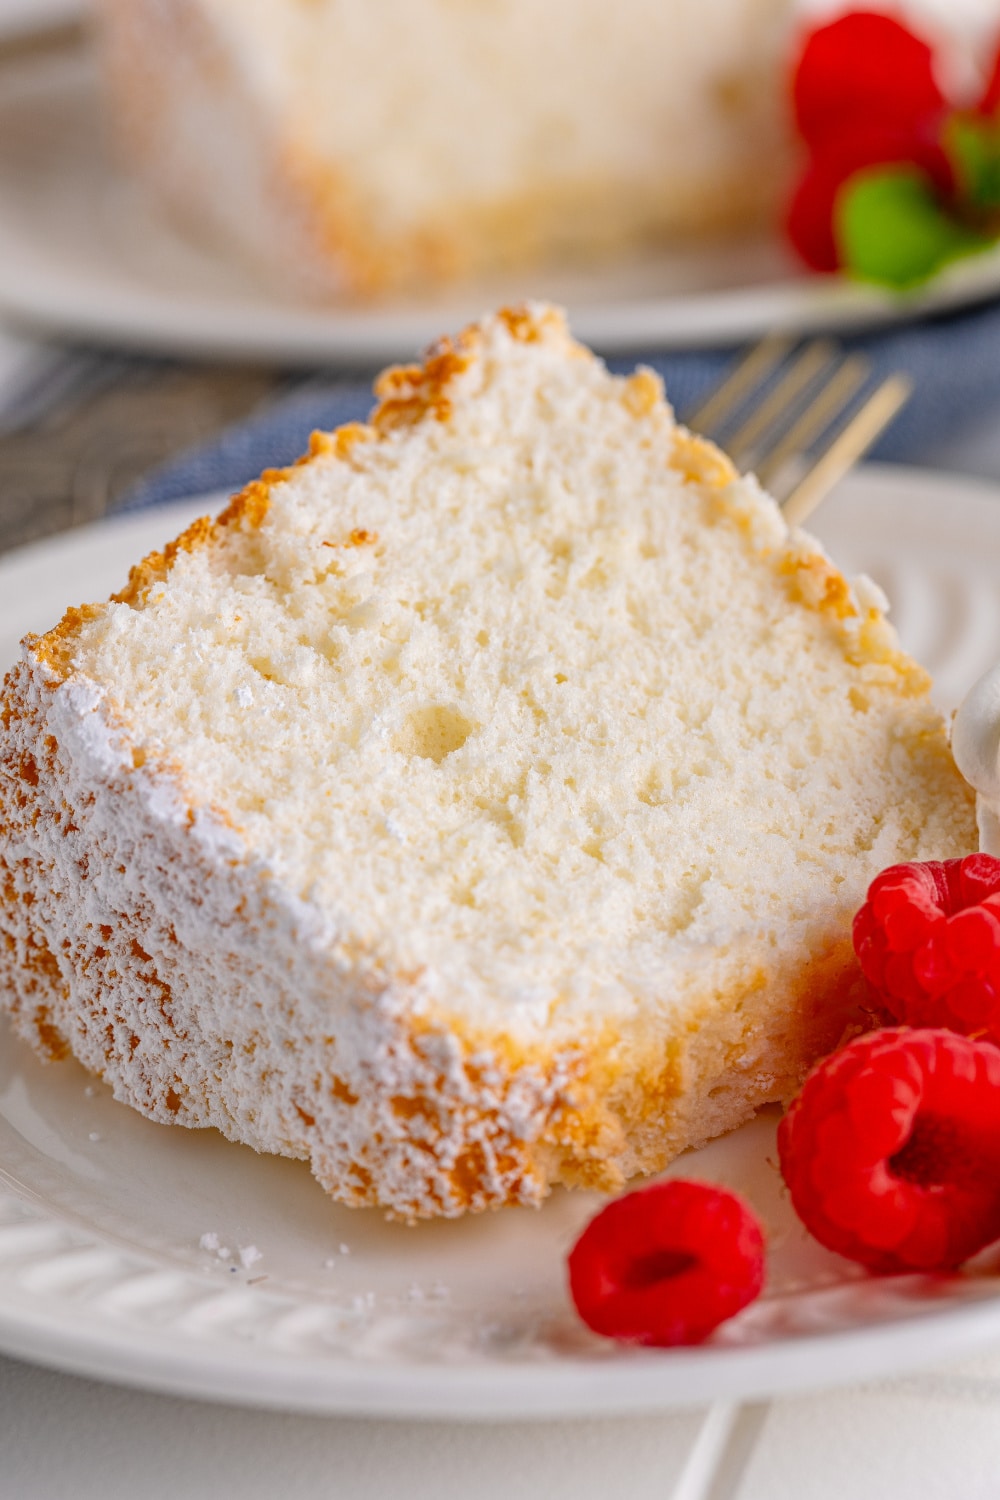 A thick slice of Angel Food Cake with red berries on a white dessert plate.